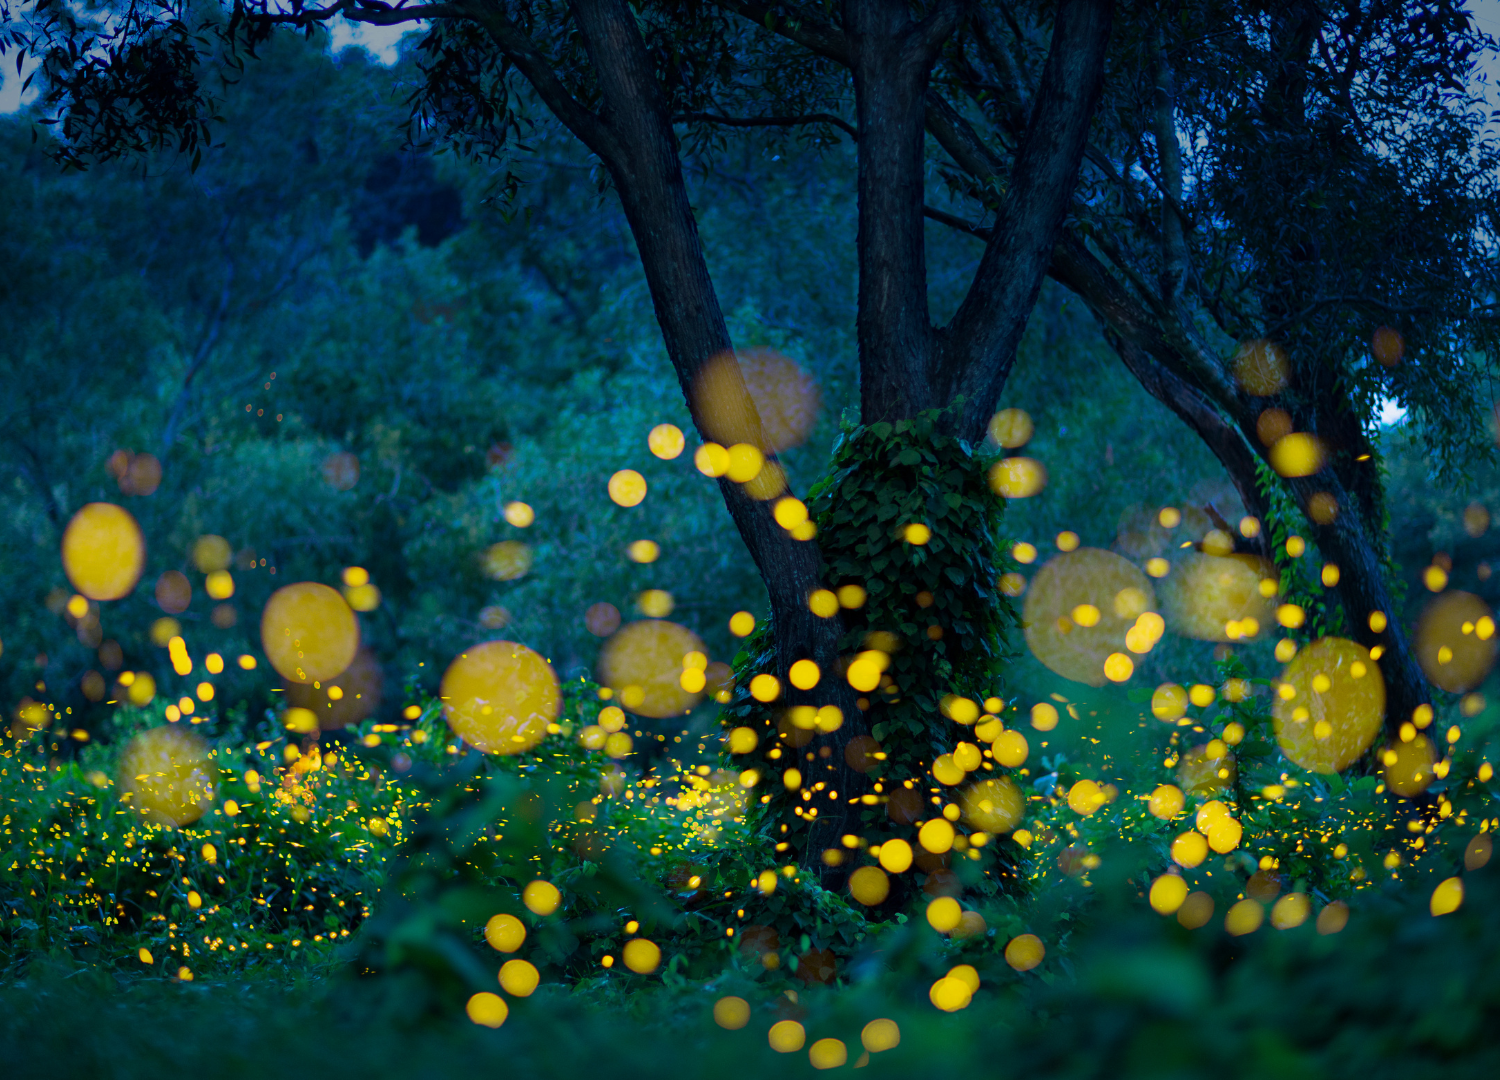 How to Photograph Fireflies Like a Pro This Summer